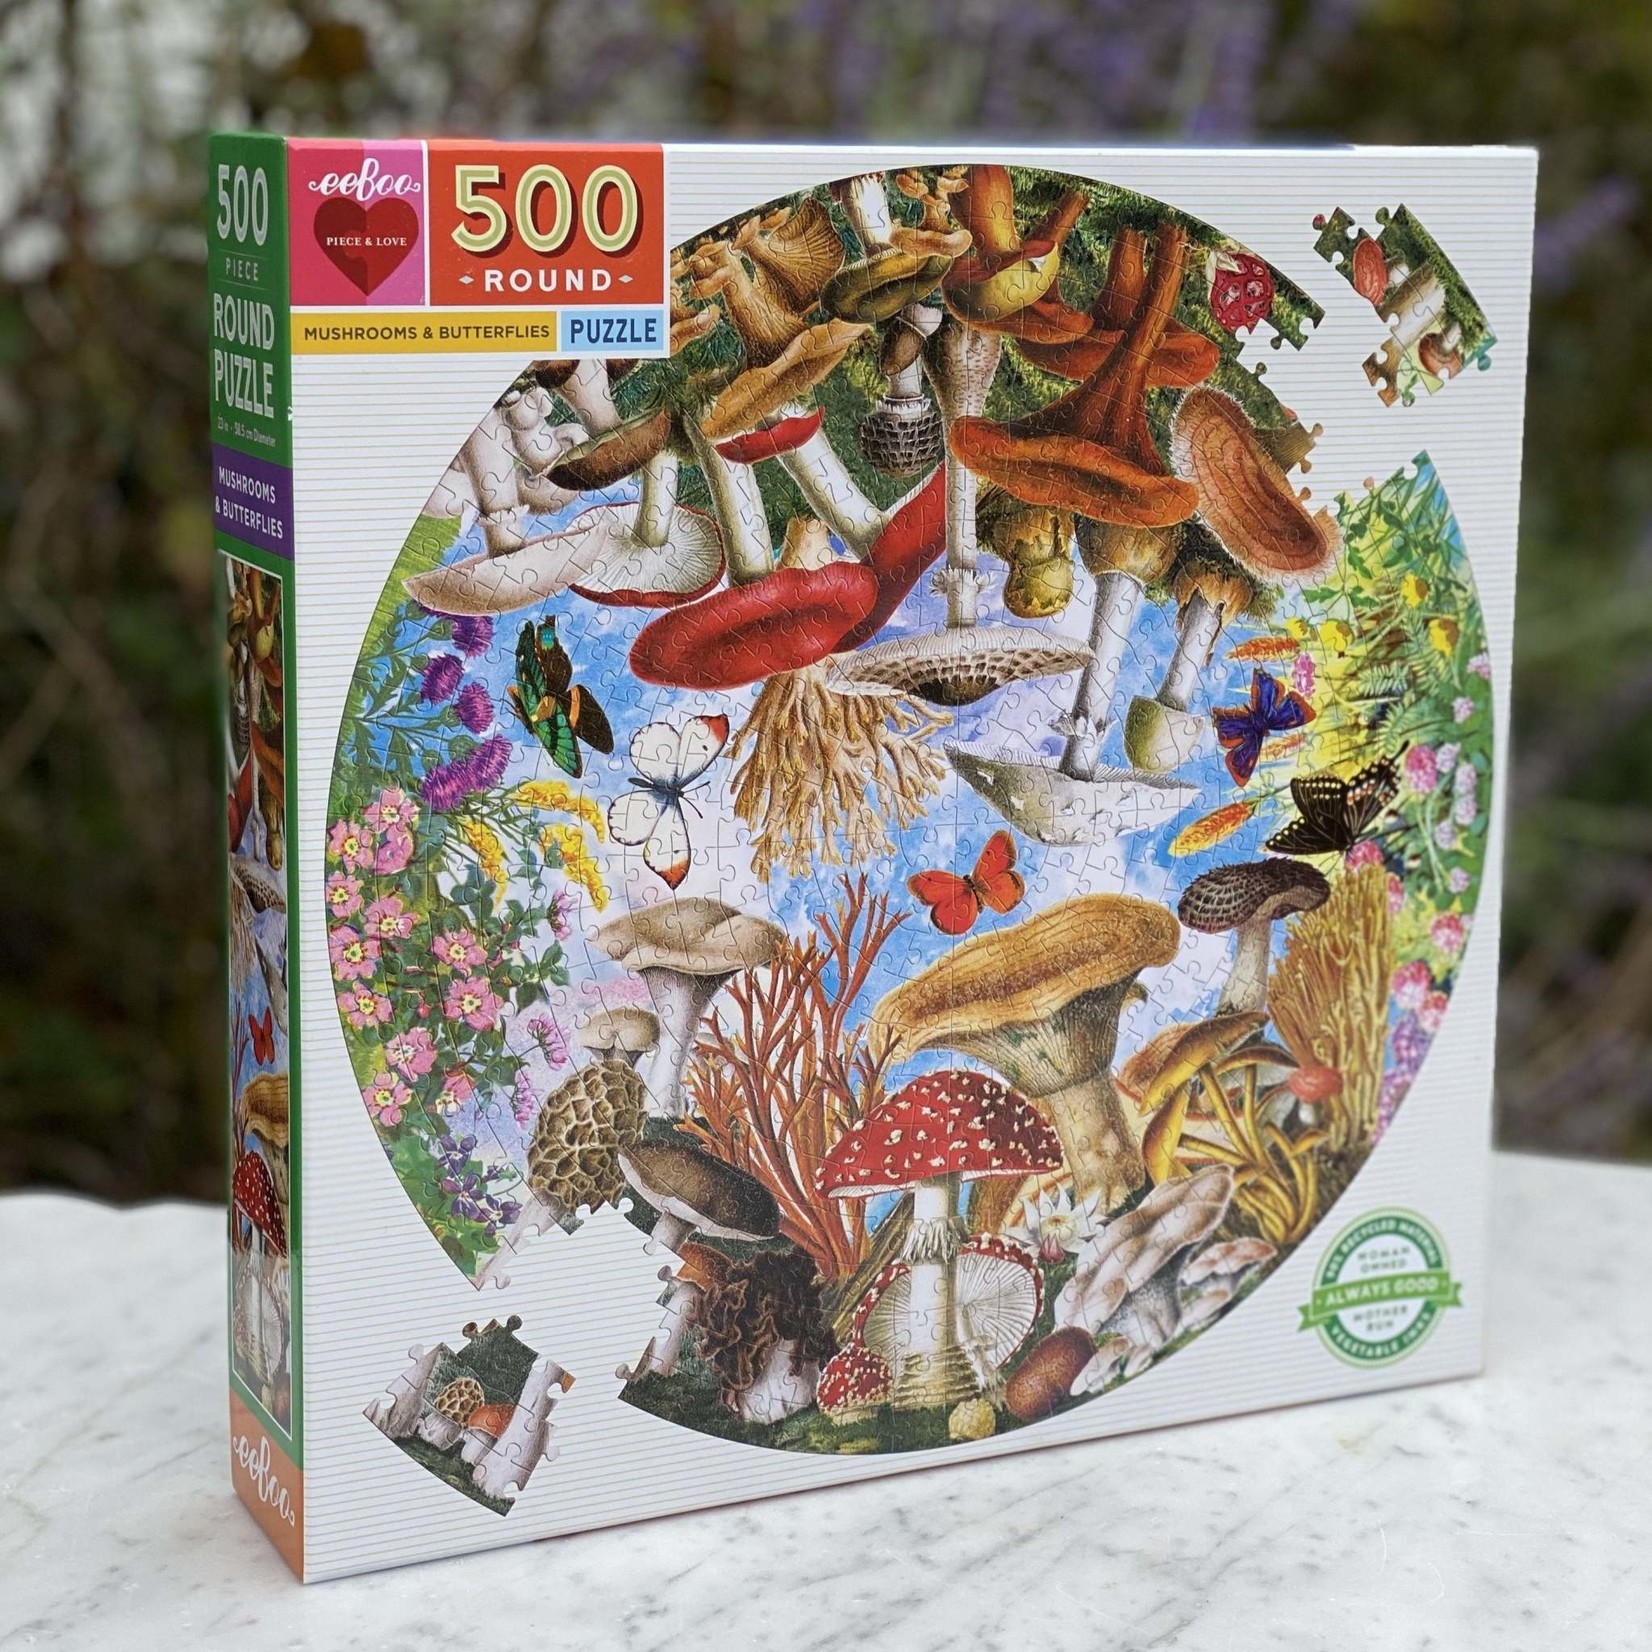 eeboo Mushrooms and Butterflies 500 Piece Round Puzzle